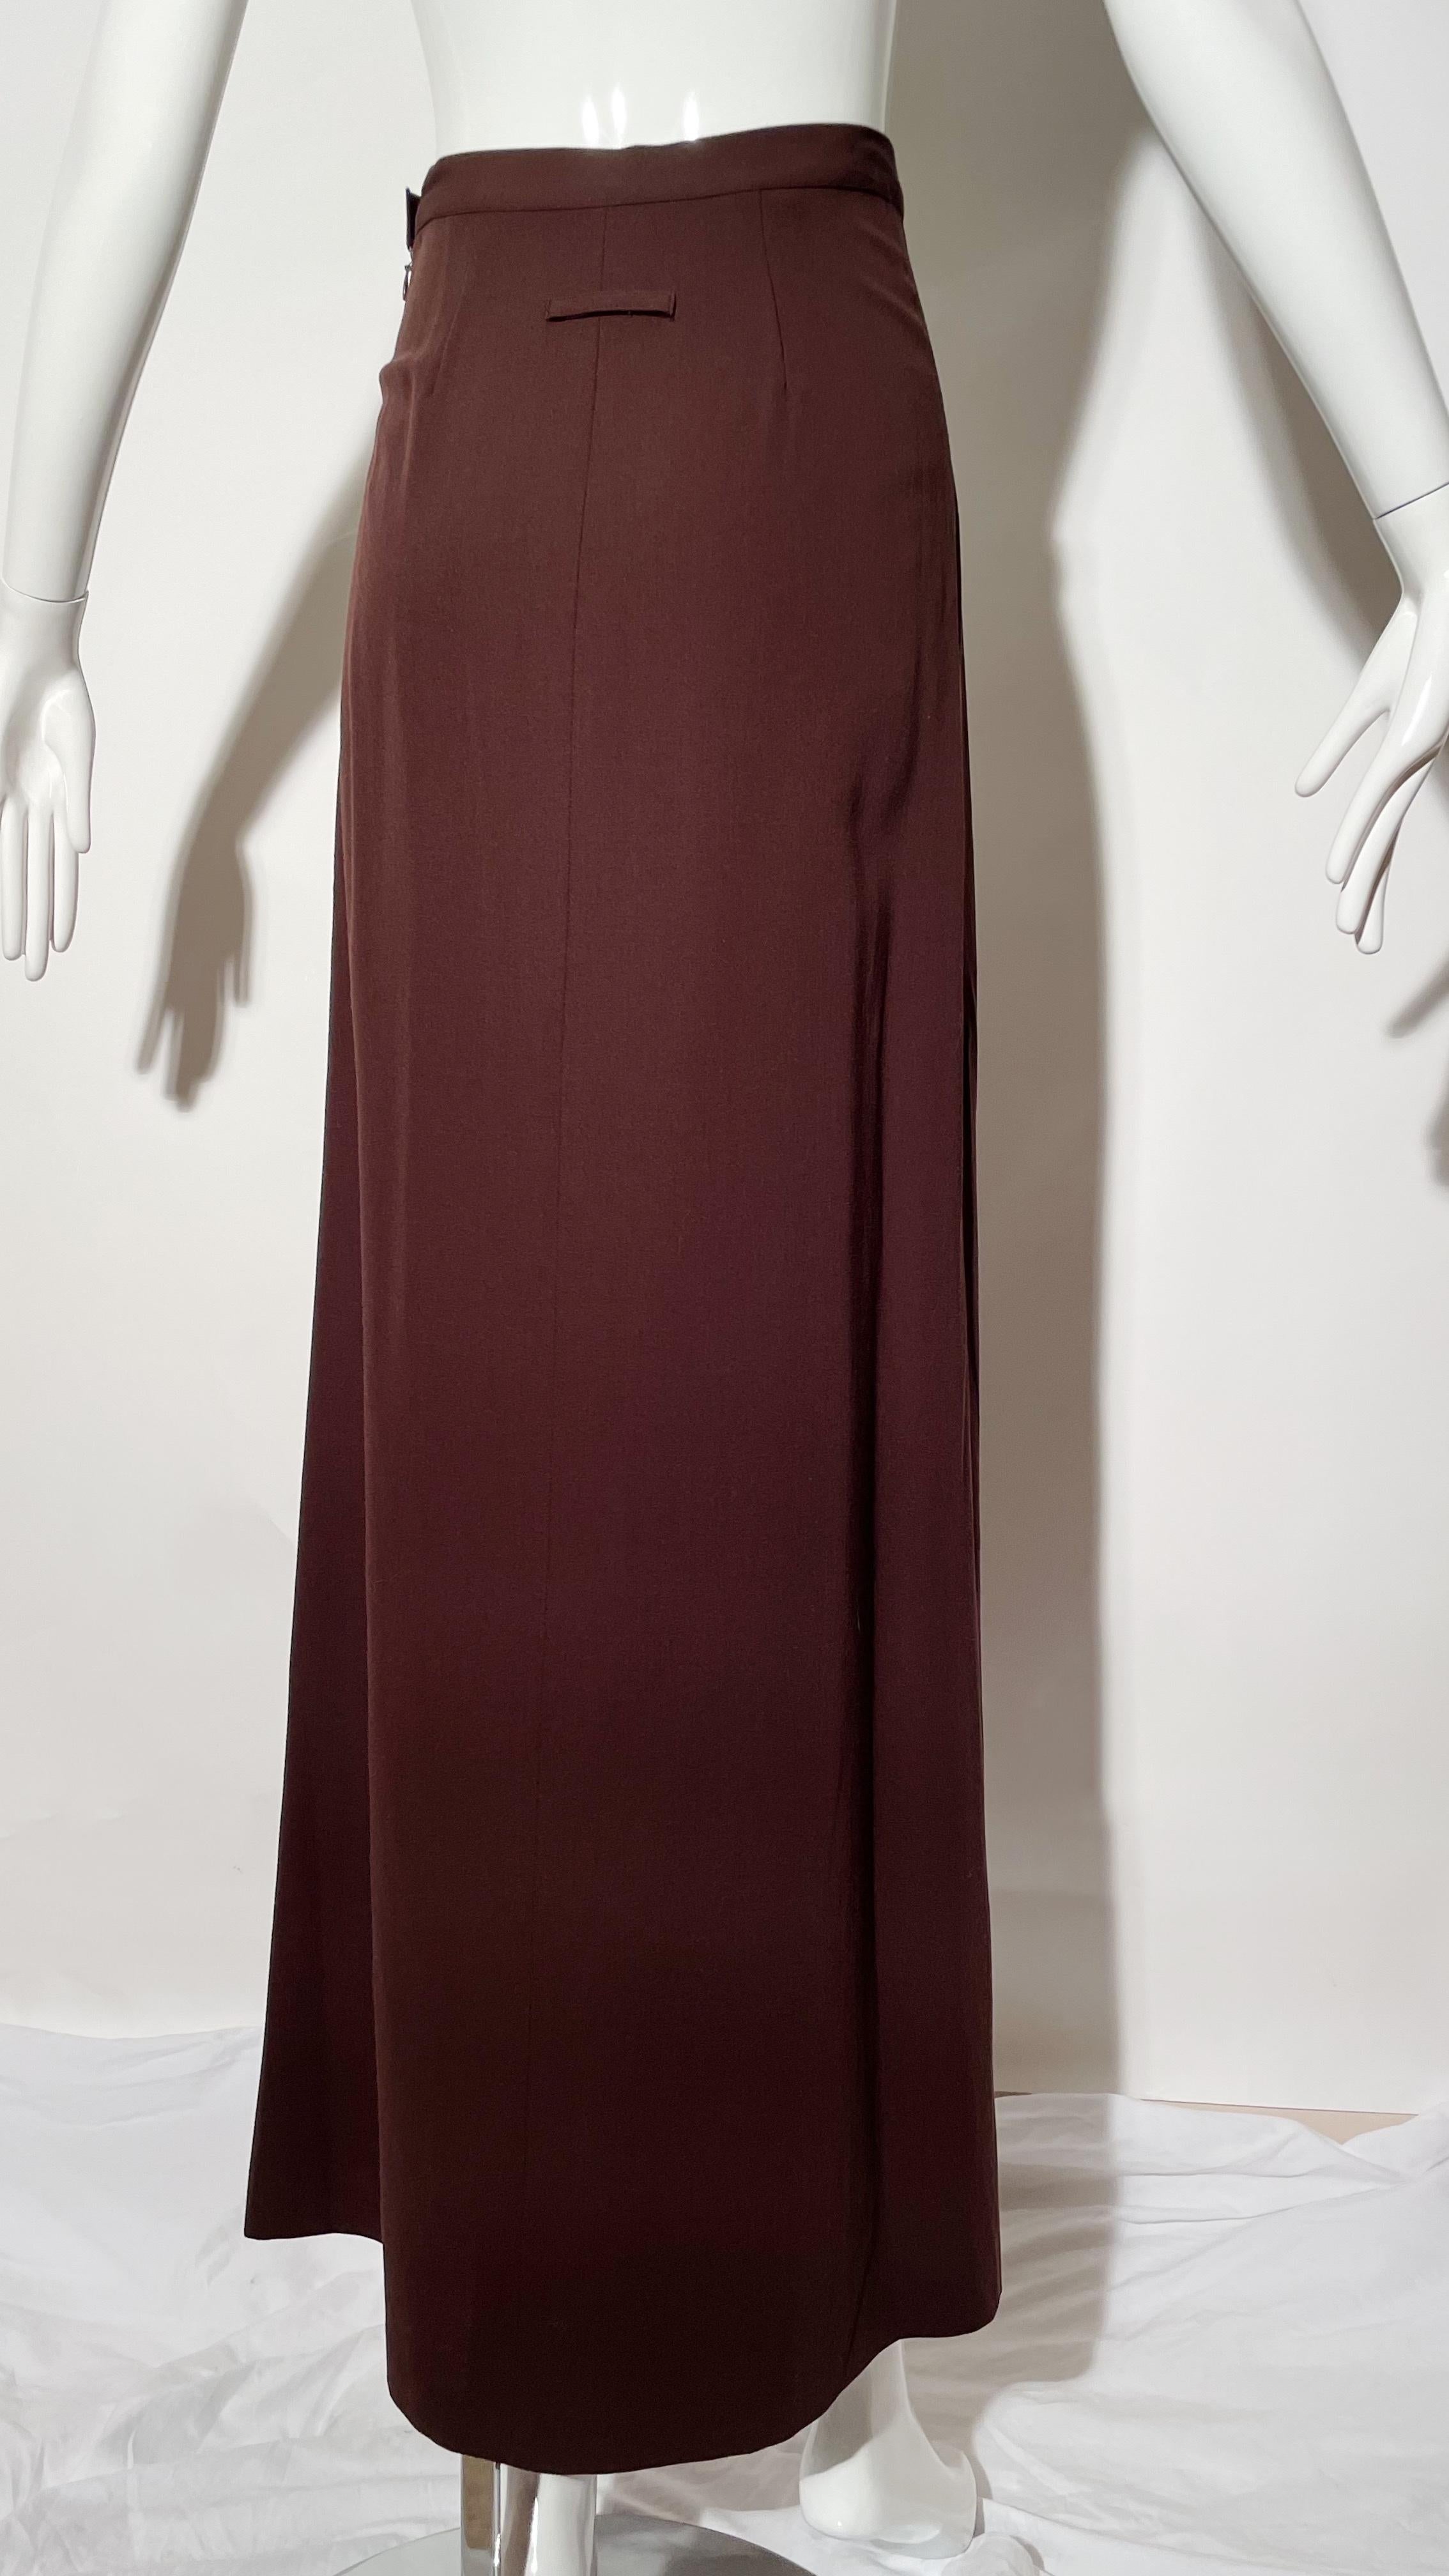 Jean Paul Gaultier Brown Maxi Skirt In Excellent Condition For Sale In Los Angeles, CA